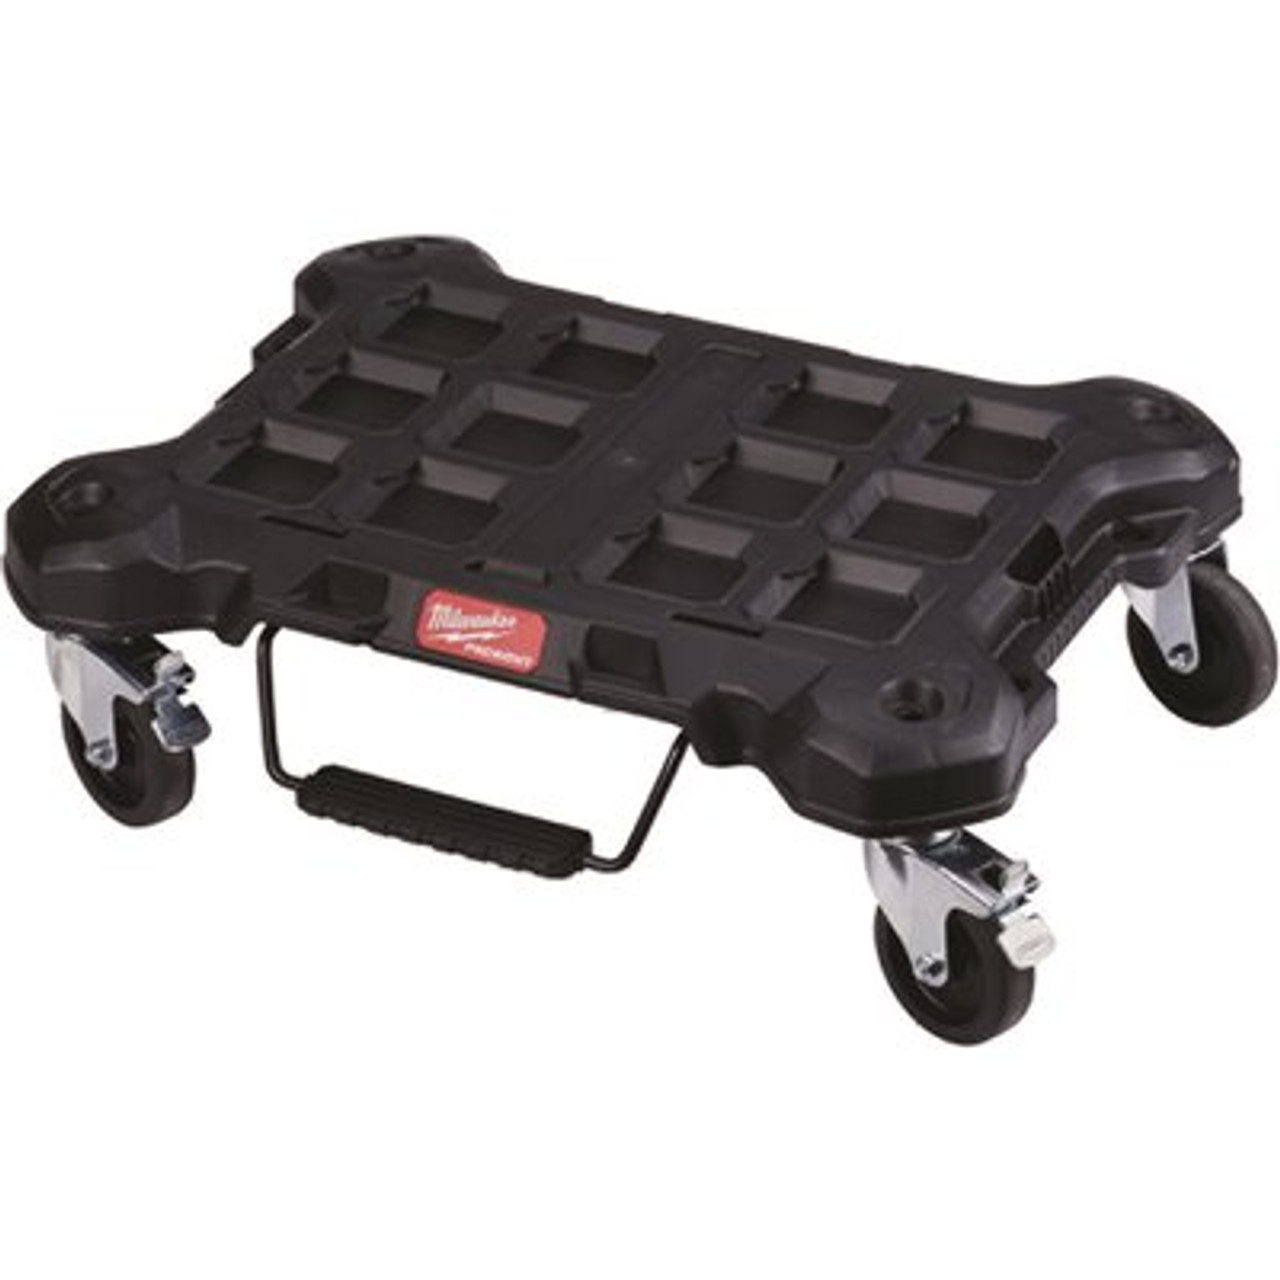 Milwaukee Packout Dolly 24 In. X 18 In. Black Multi-Purpose Utility Cart